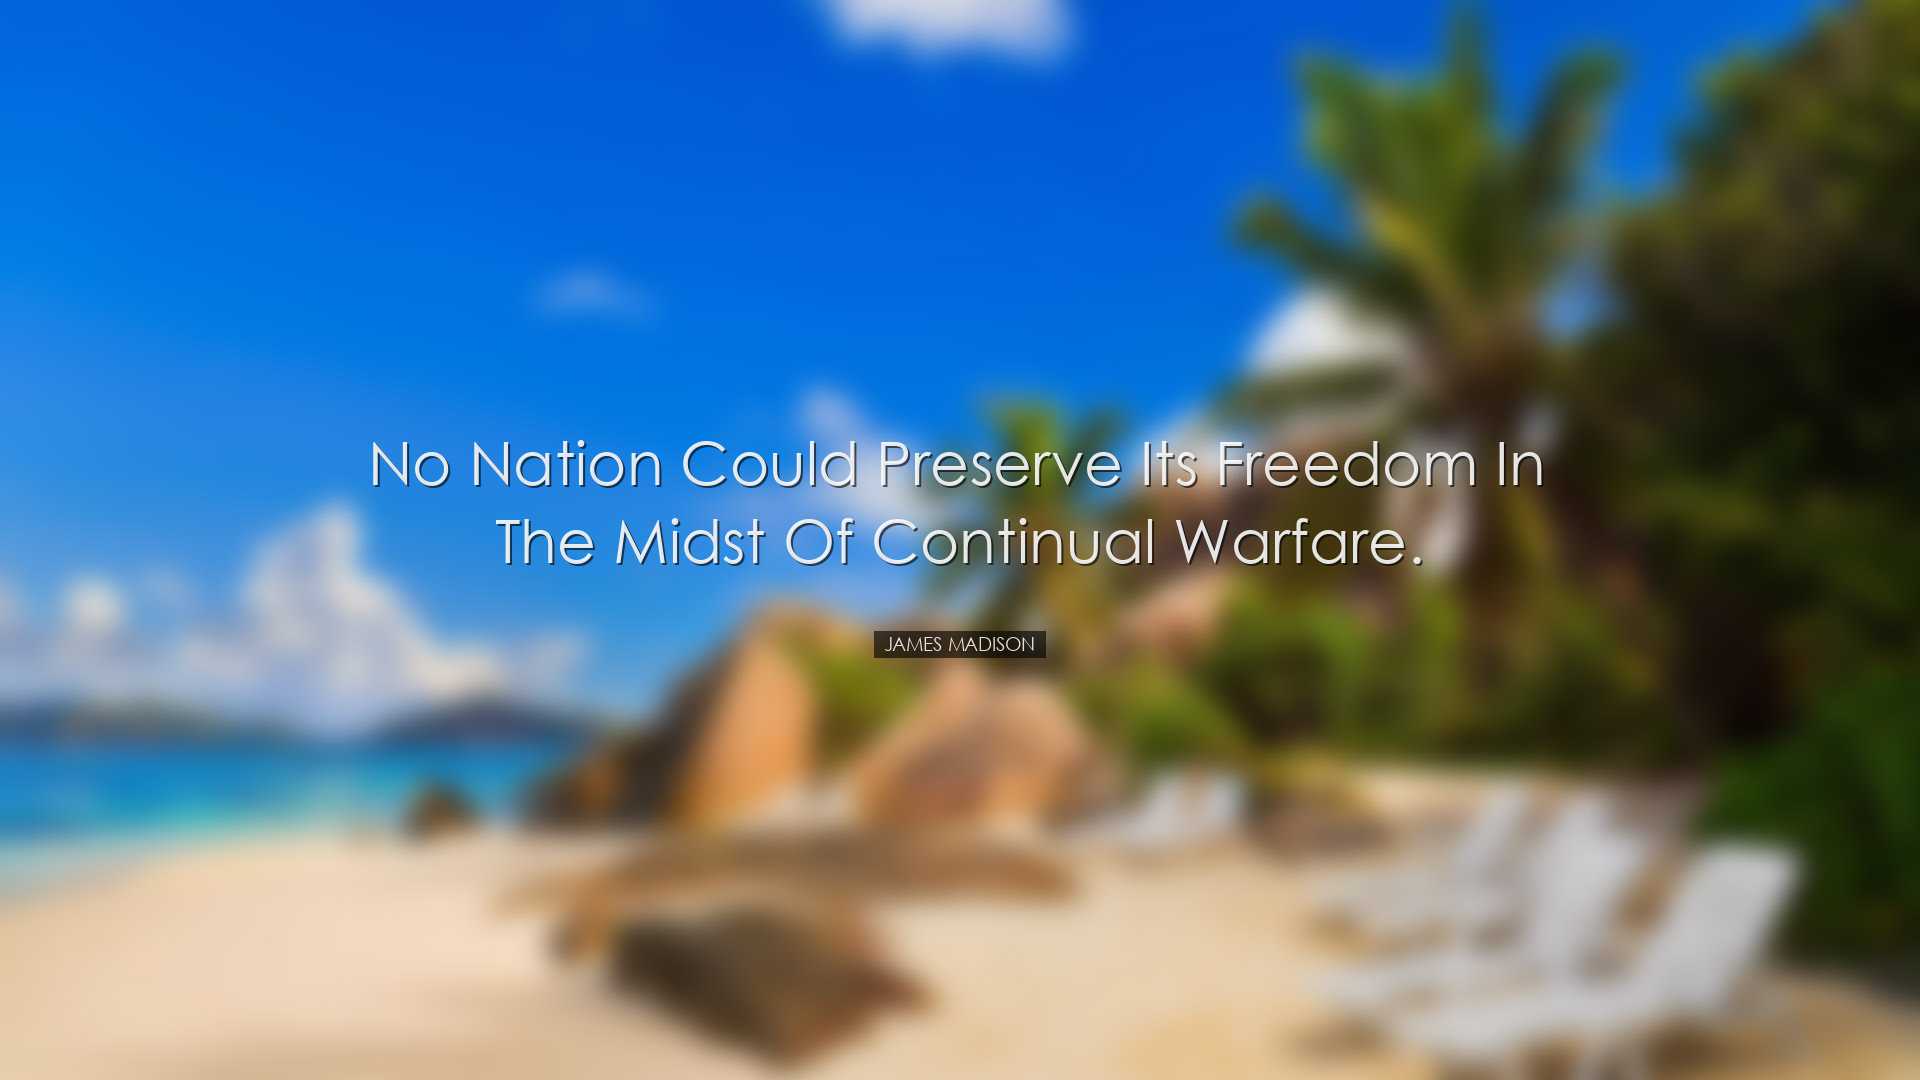 No nation could preserve its freedom in the midst of continual war